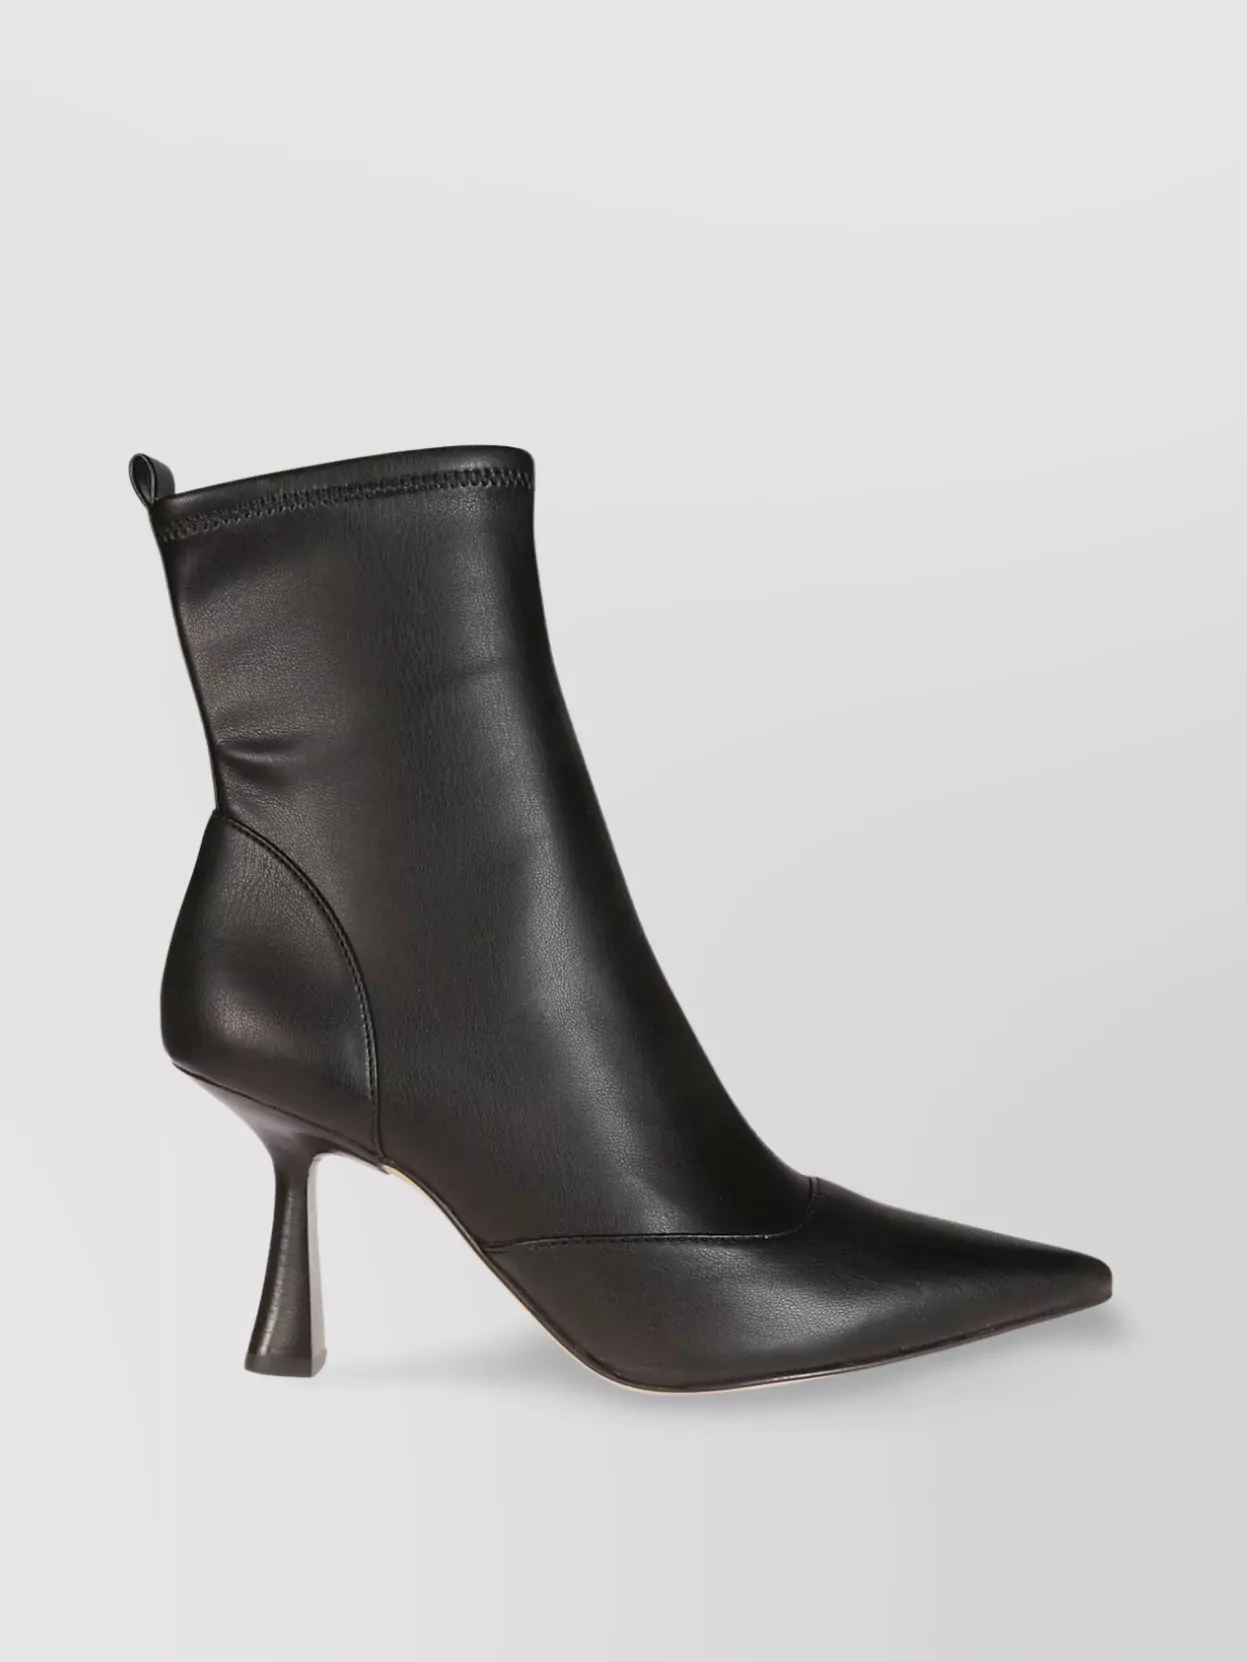 Shop Michael Kors Refined Leather Ankle Boot